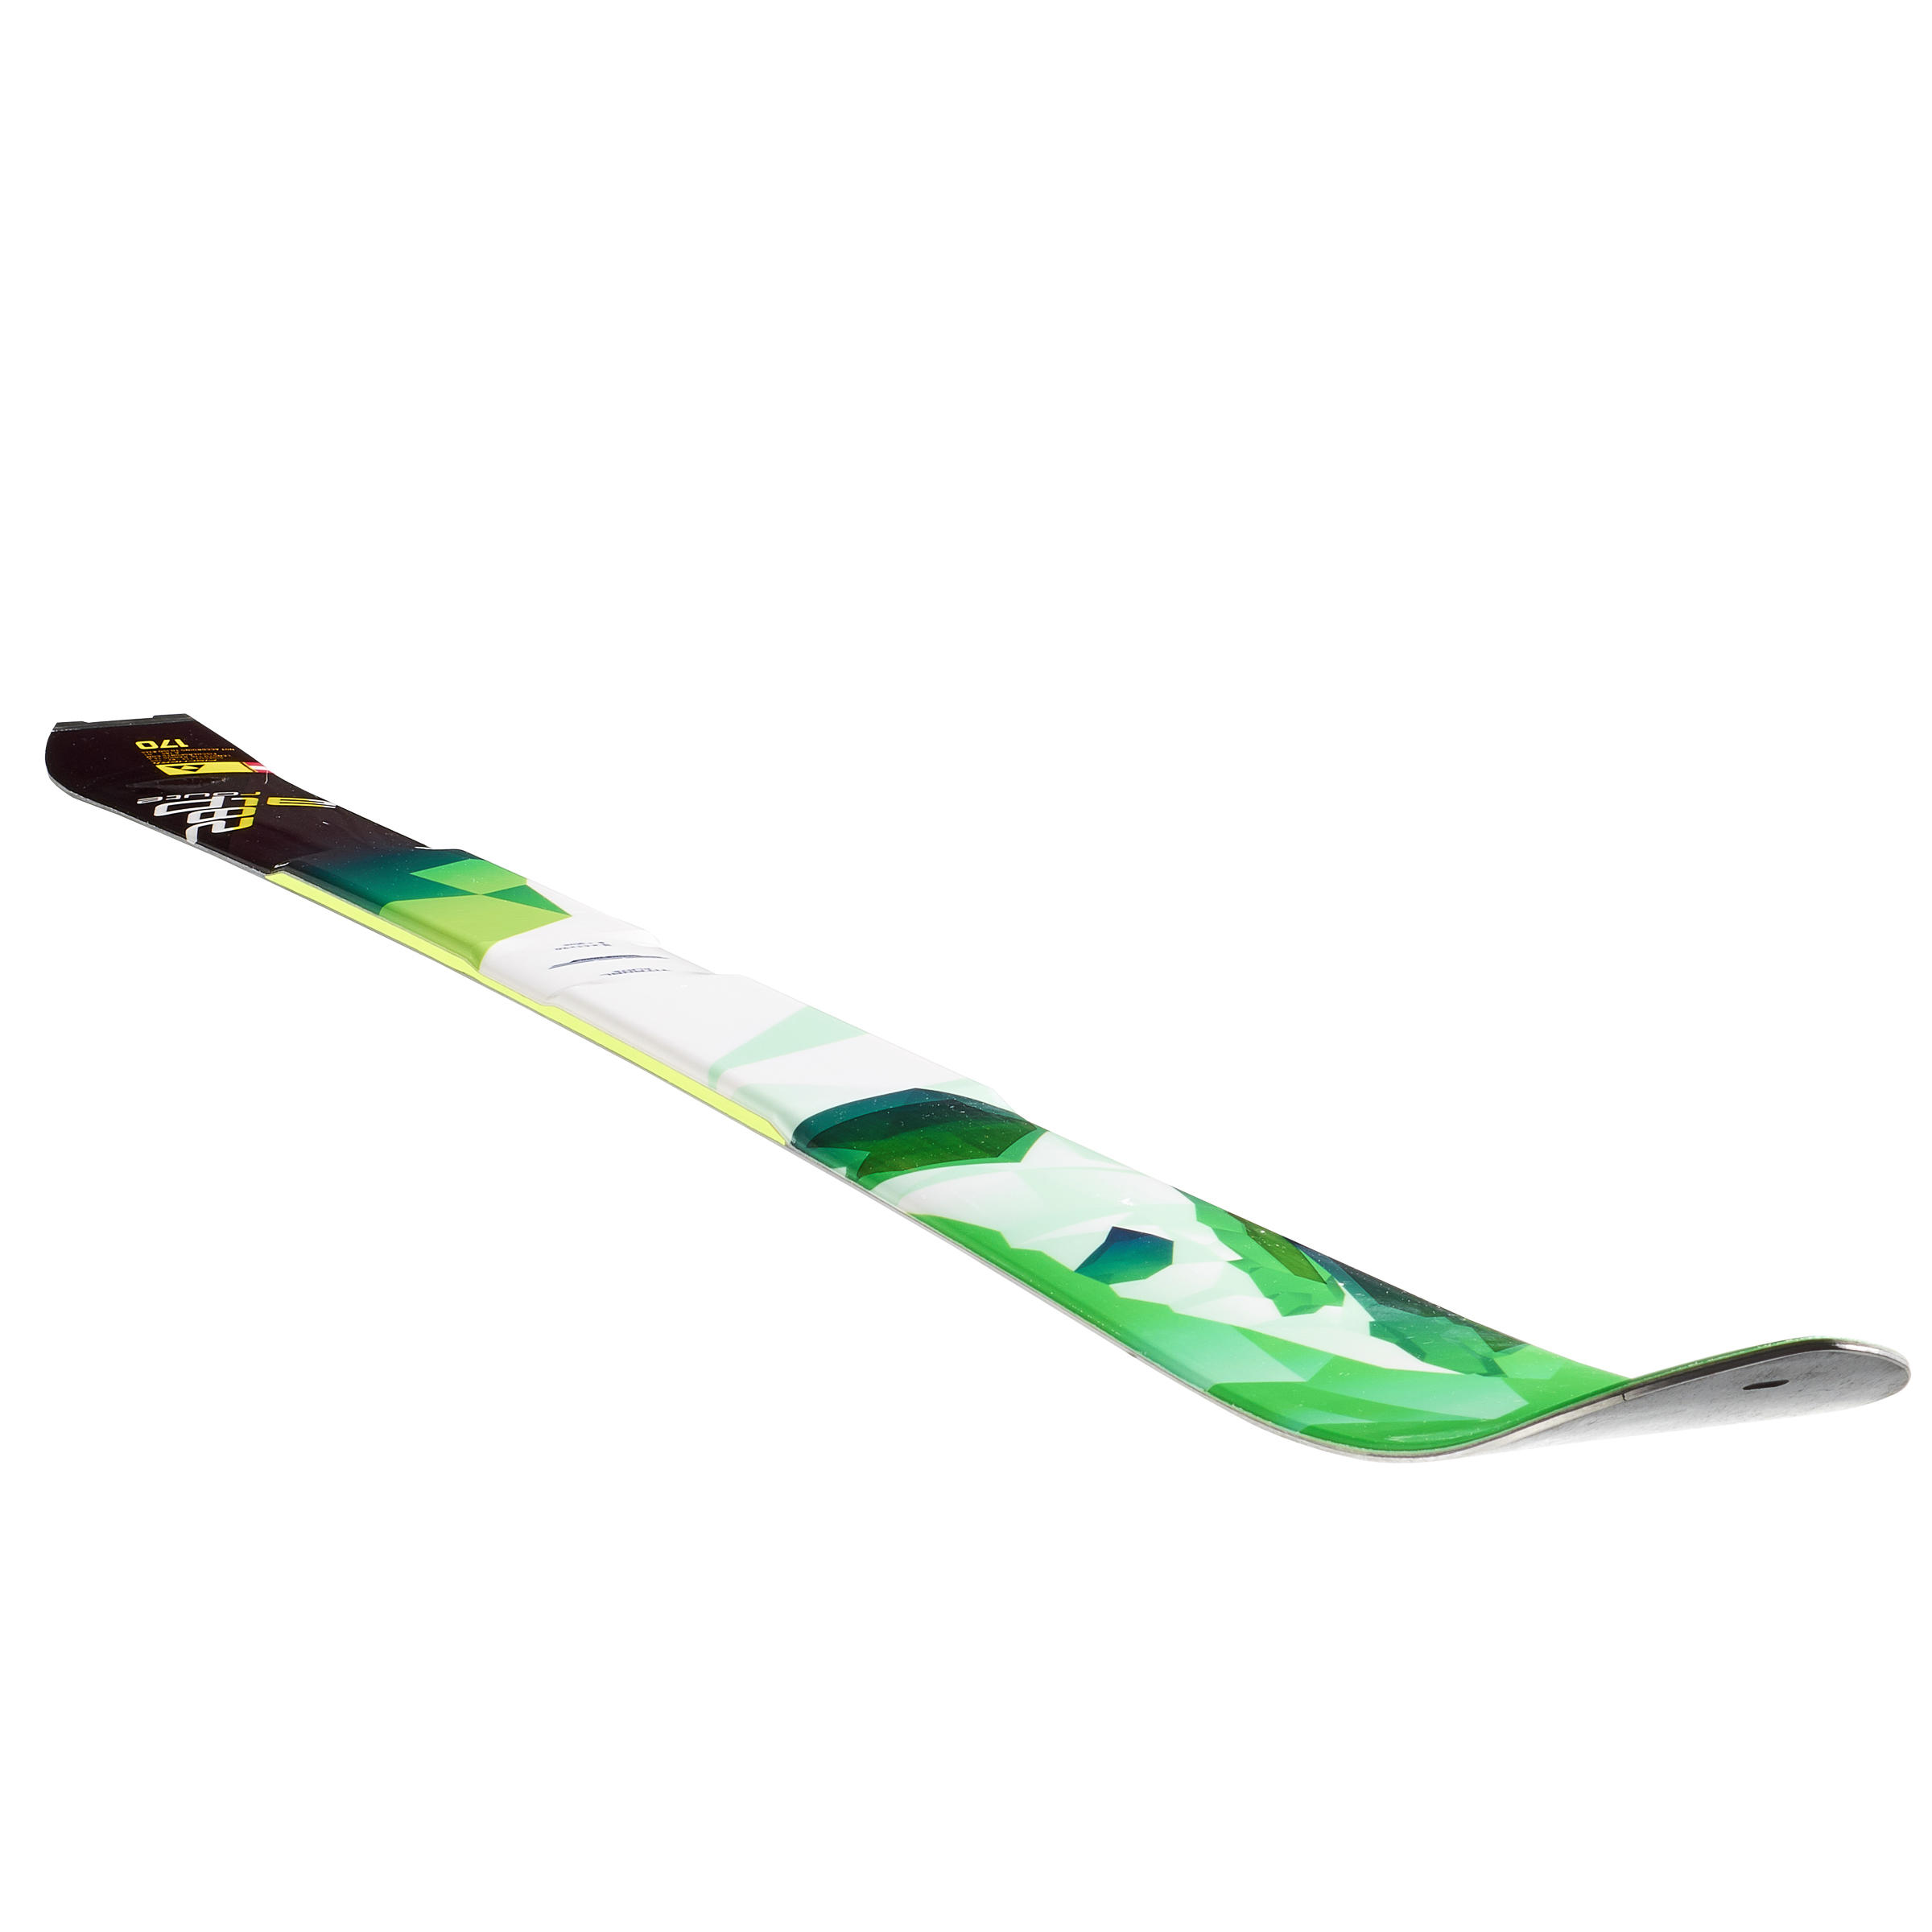 Alproute 82 Cross-Country Skis - Green 5/5